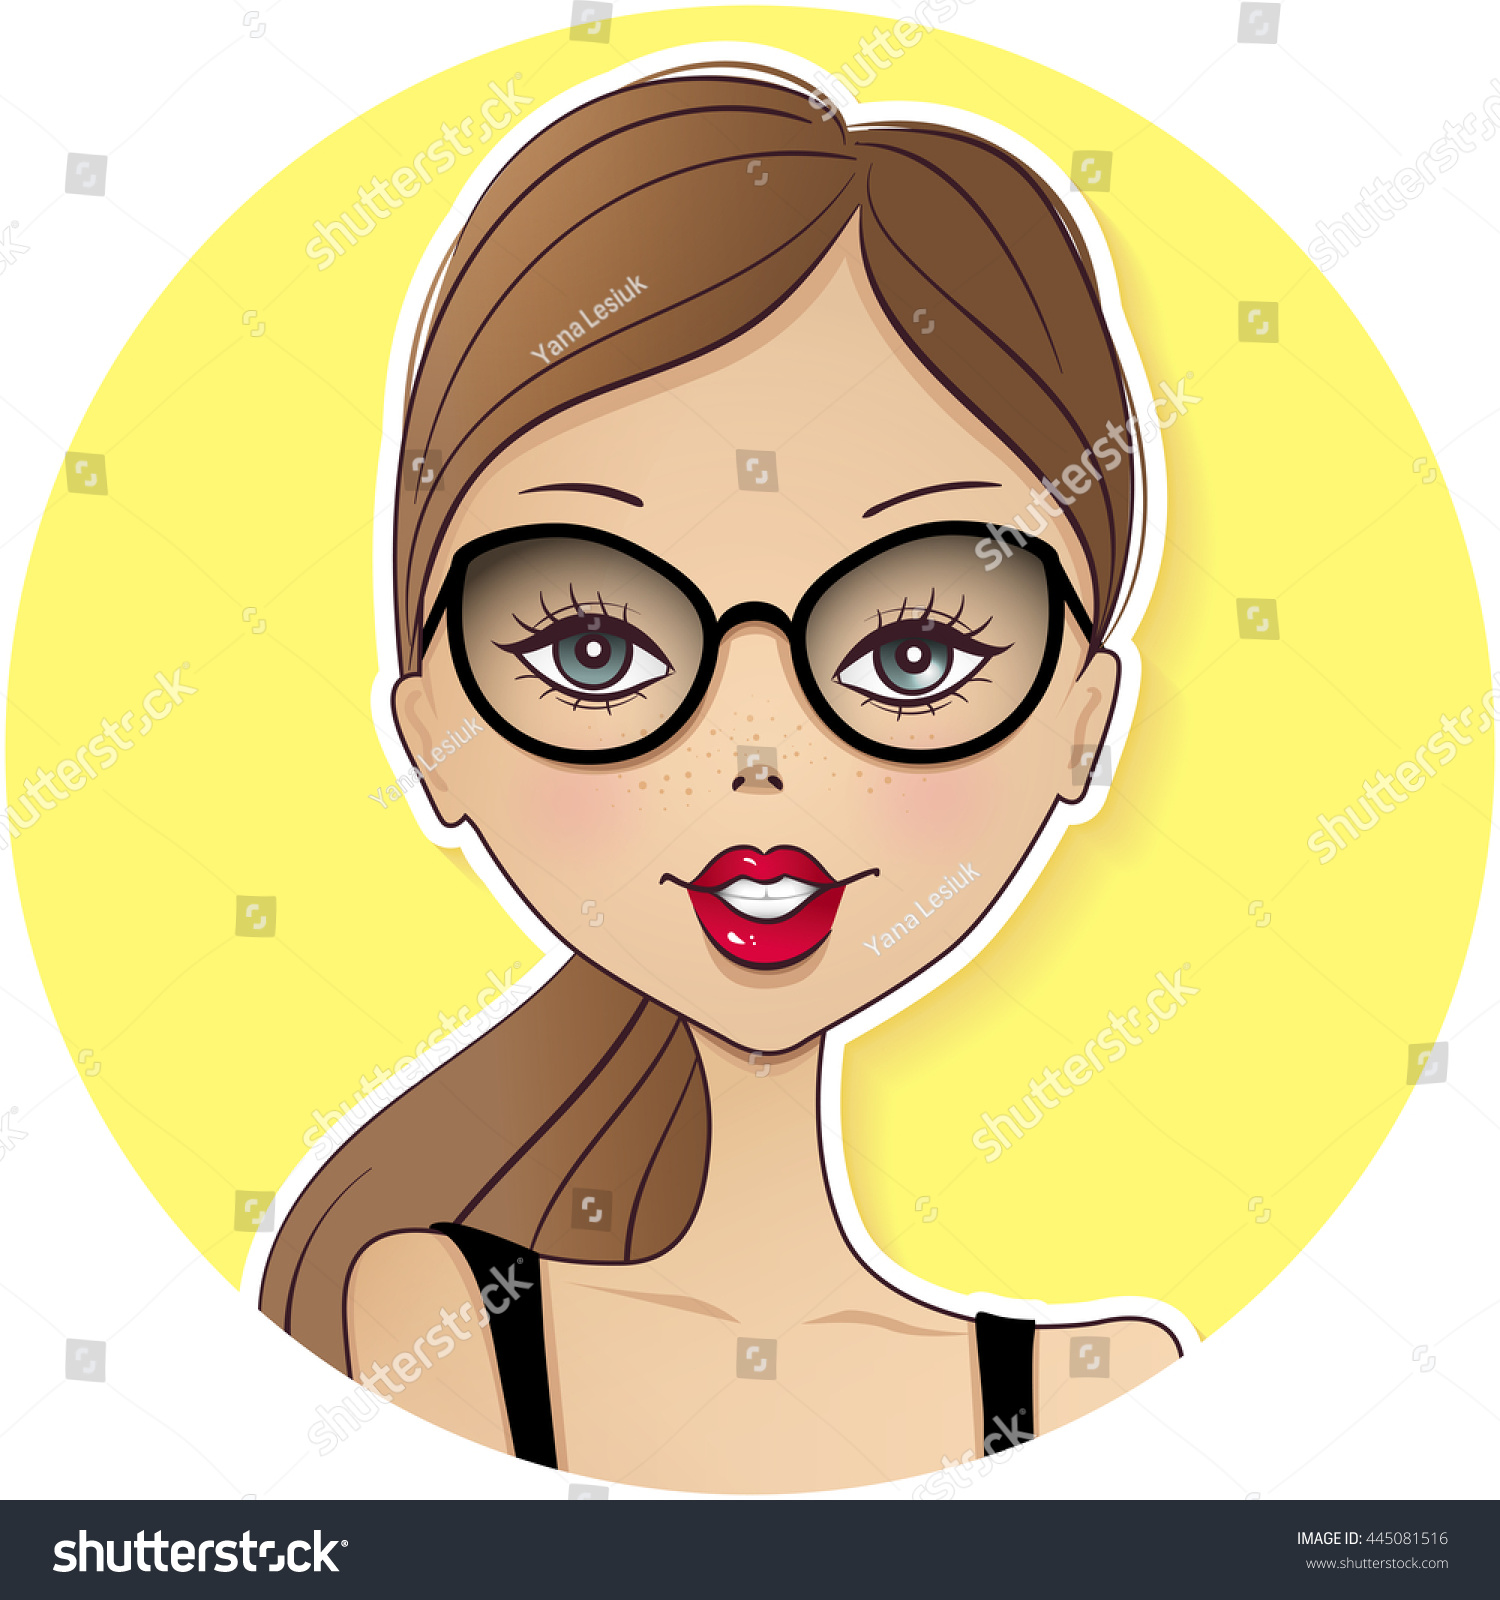 clipart girl with glasses - photo #37